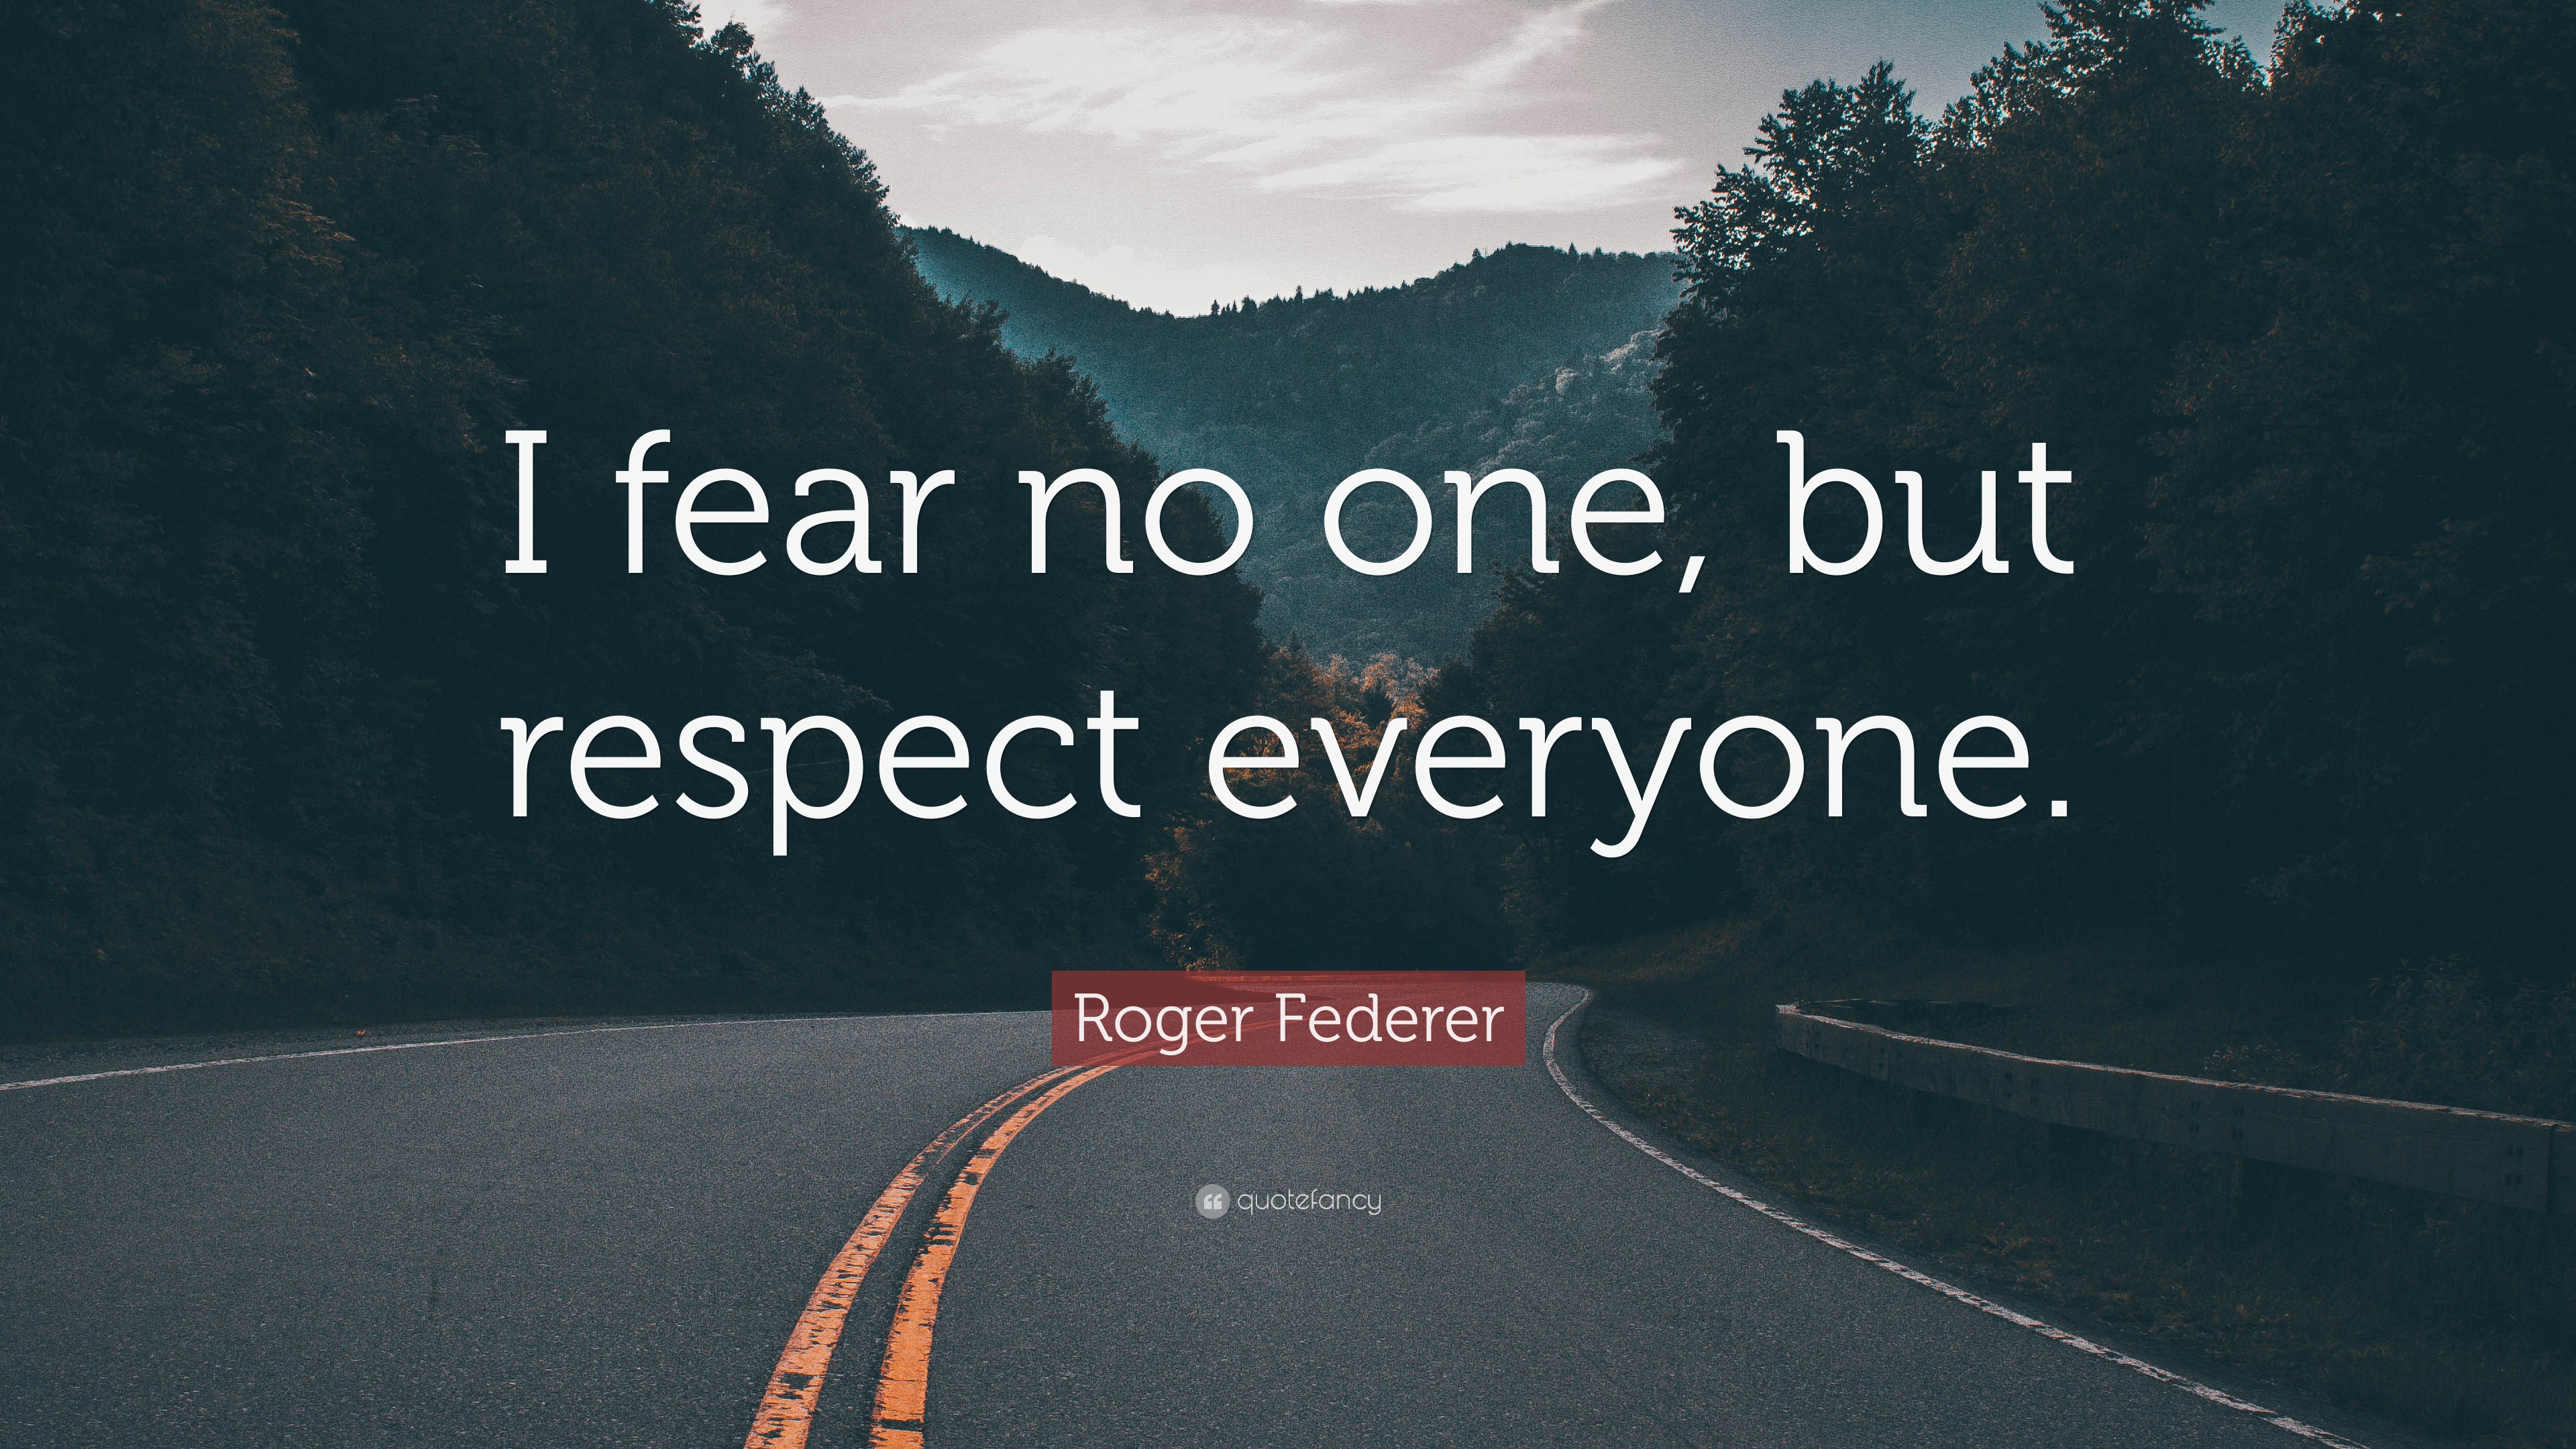 Roger Federer Quote: “I fear no one, but respect everyone.”